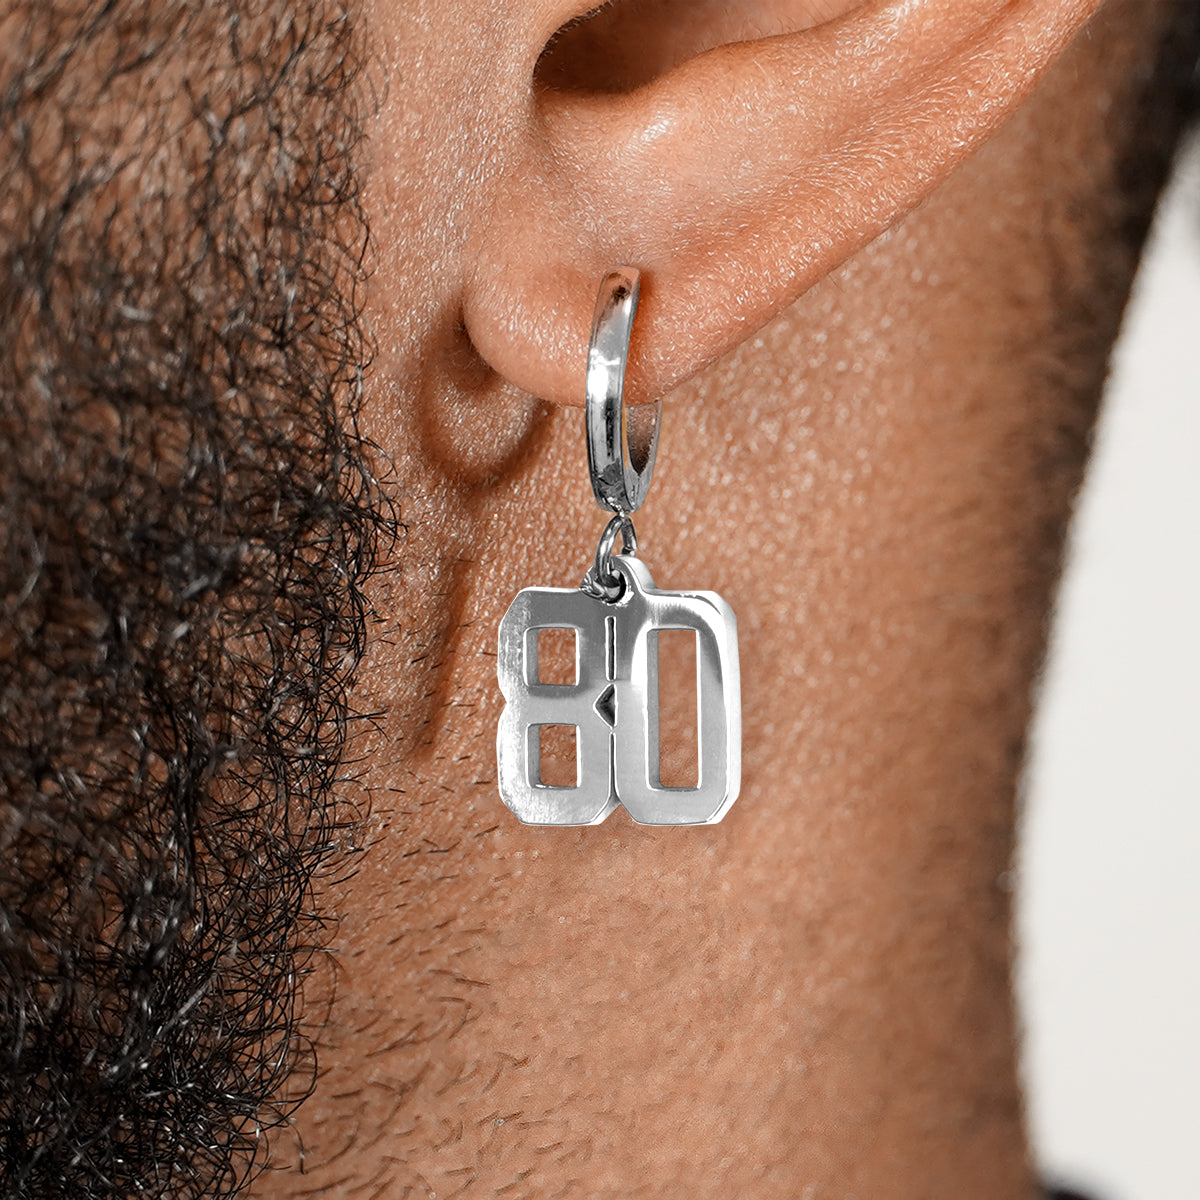 80 Number Earring - Stainless Steel